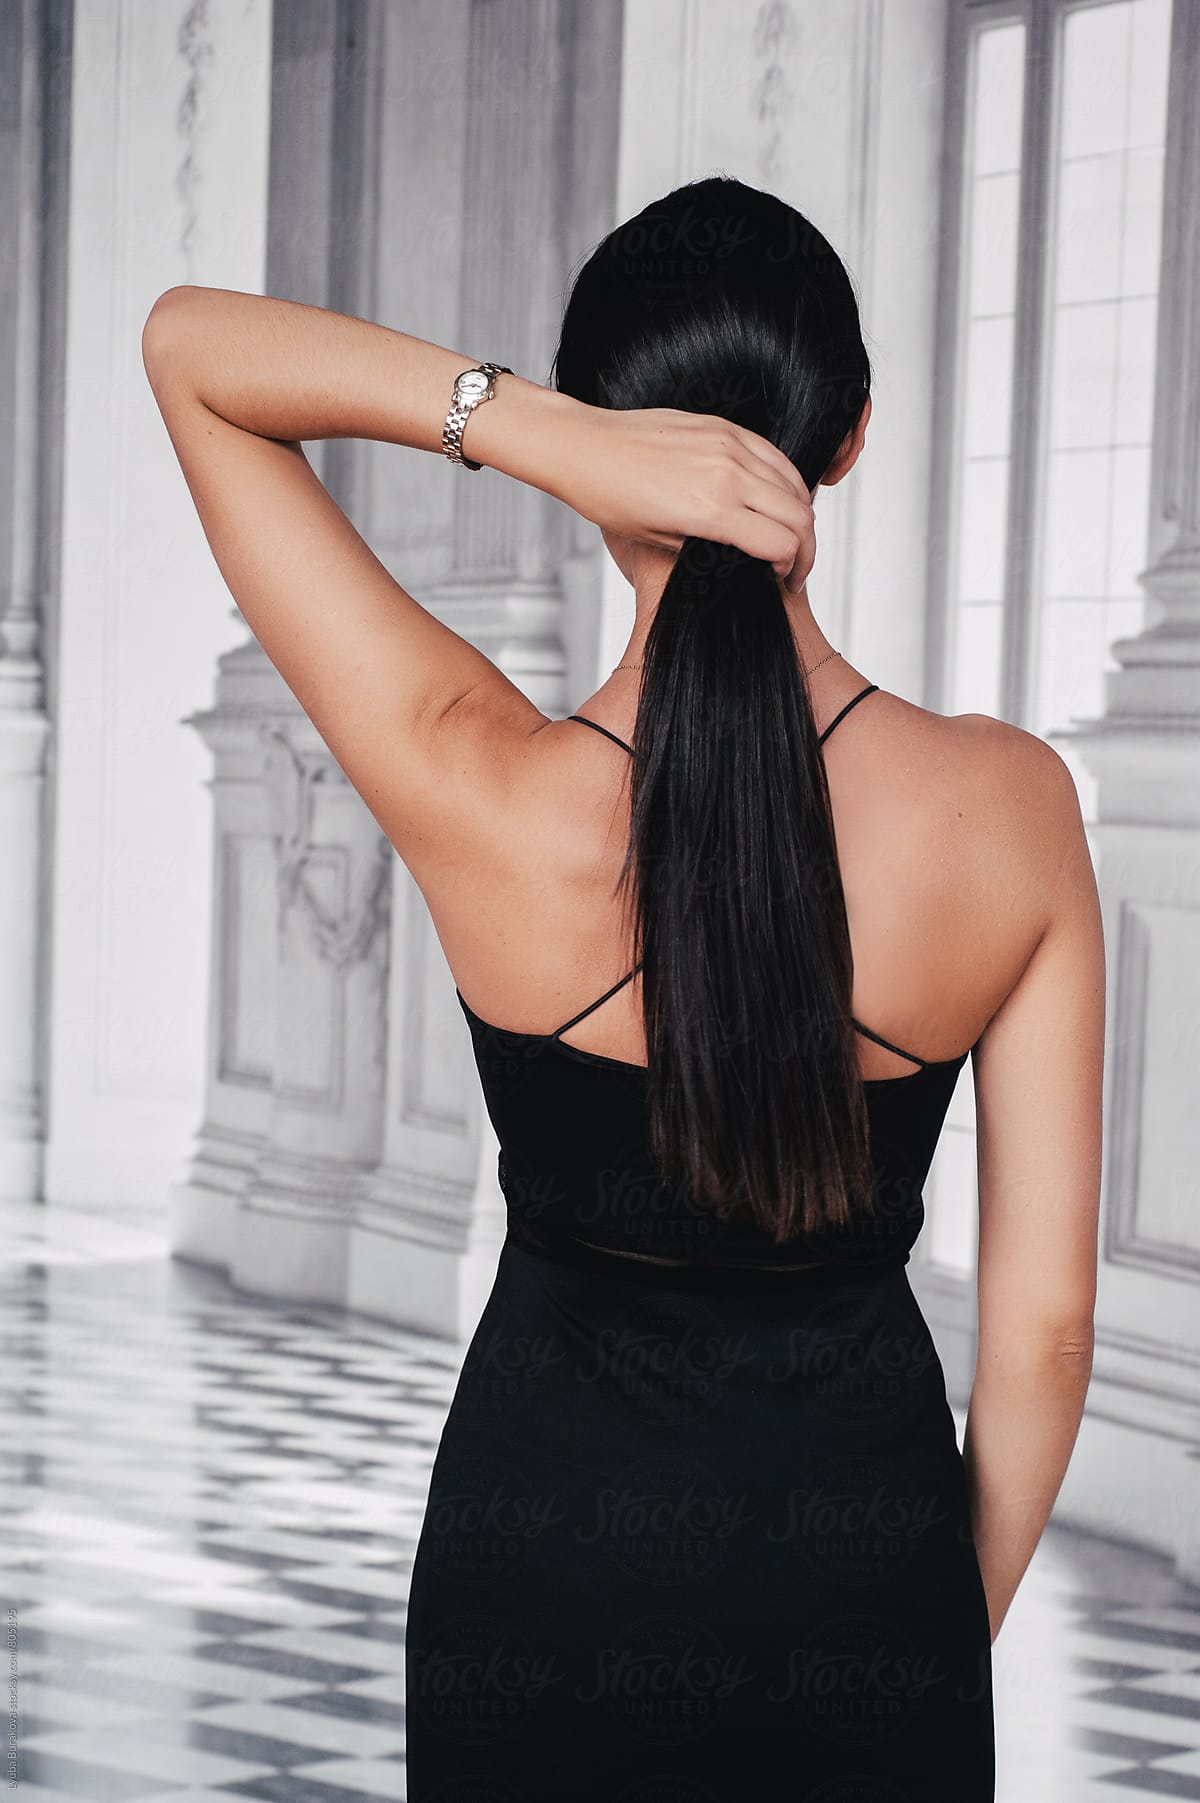 Back view of the woman holding her hair in a tail